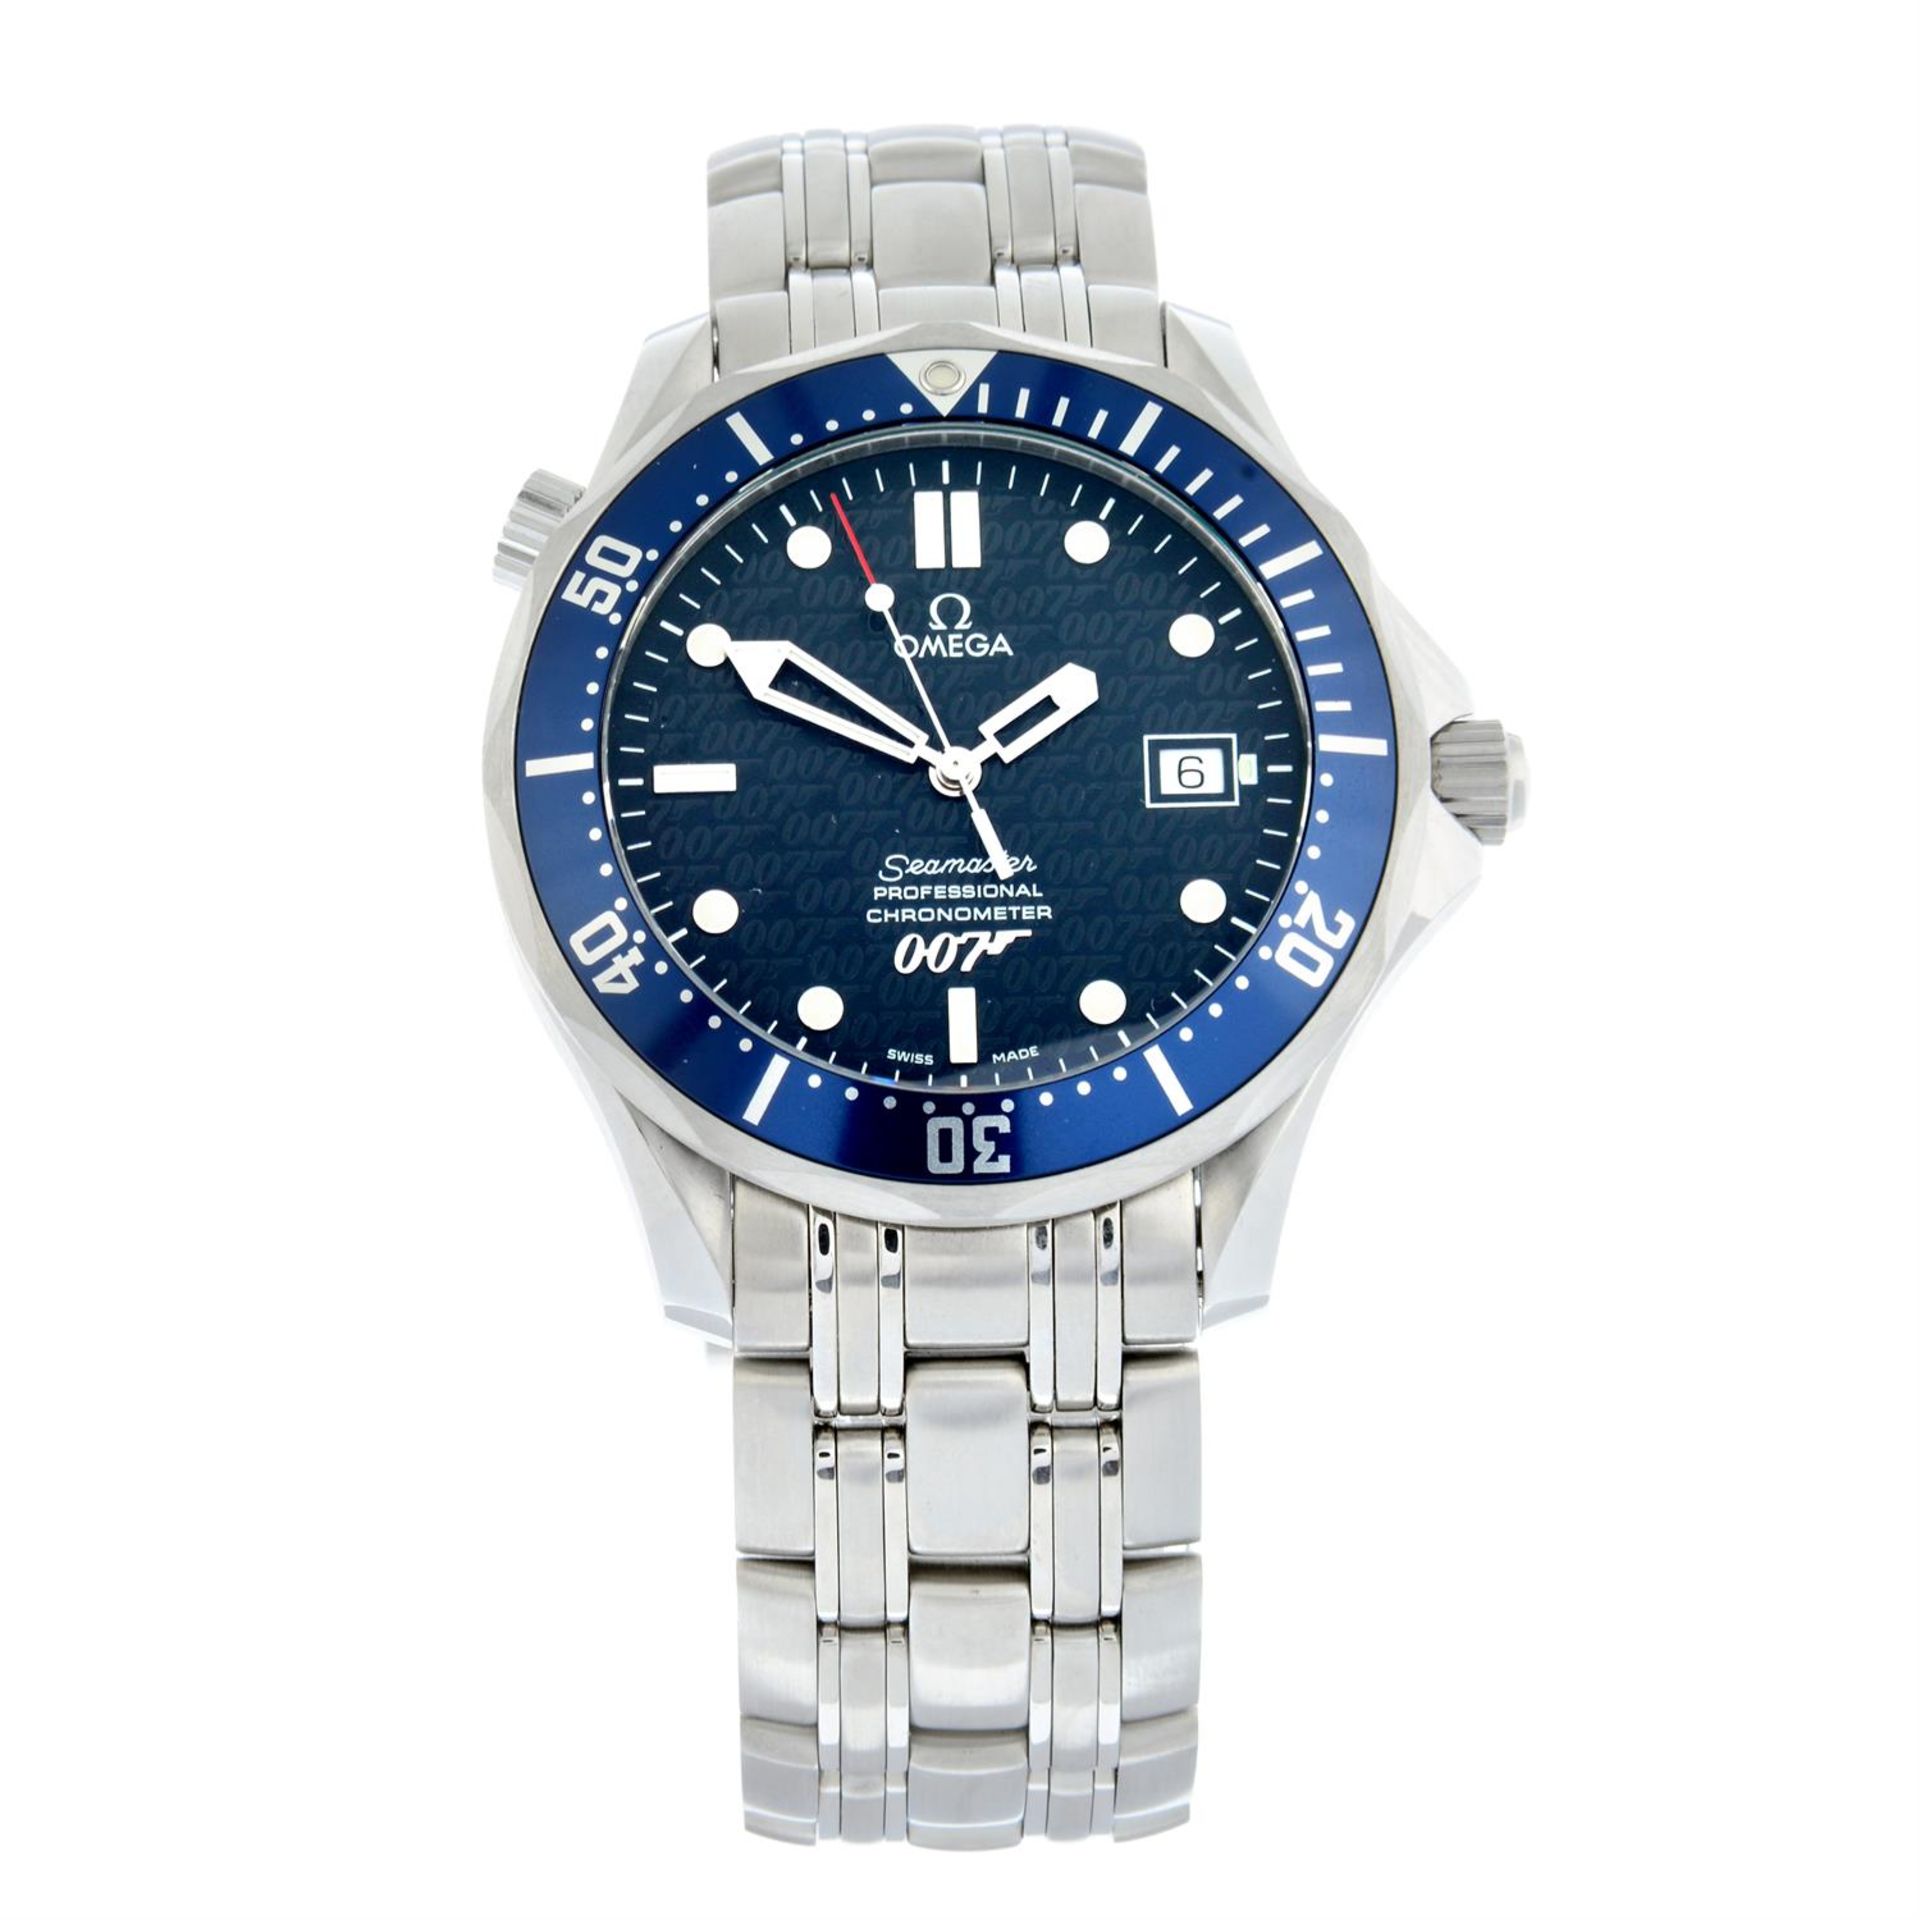 OMEGA - a limited edition stainless steel Seamaster 007 bracelet watch, 41mm.